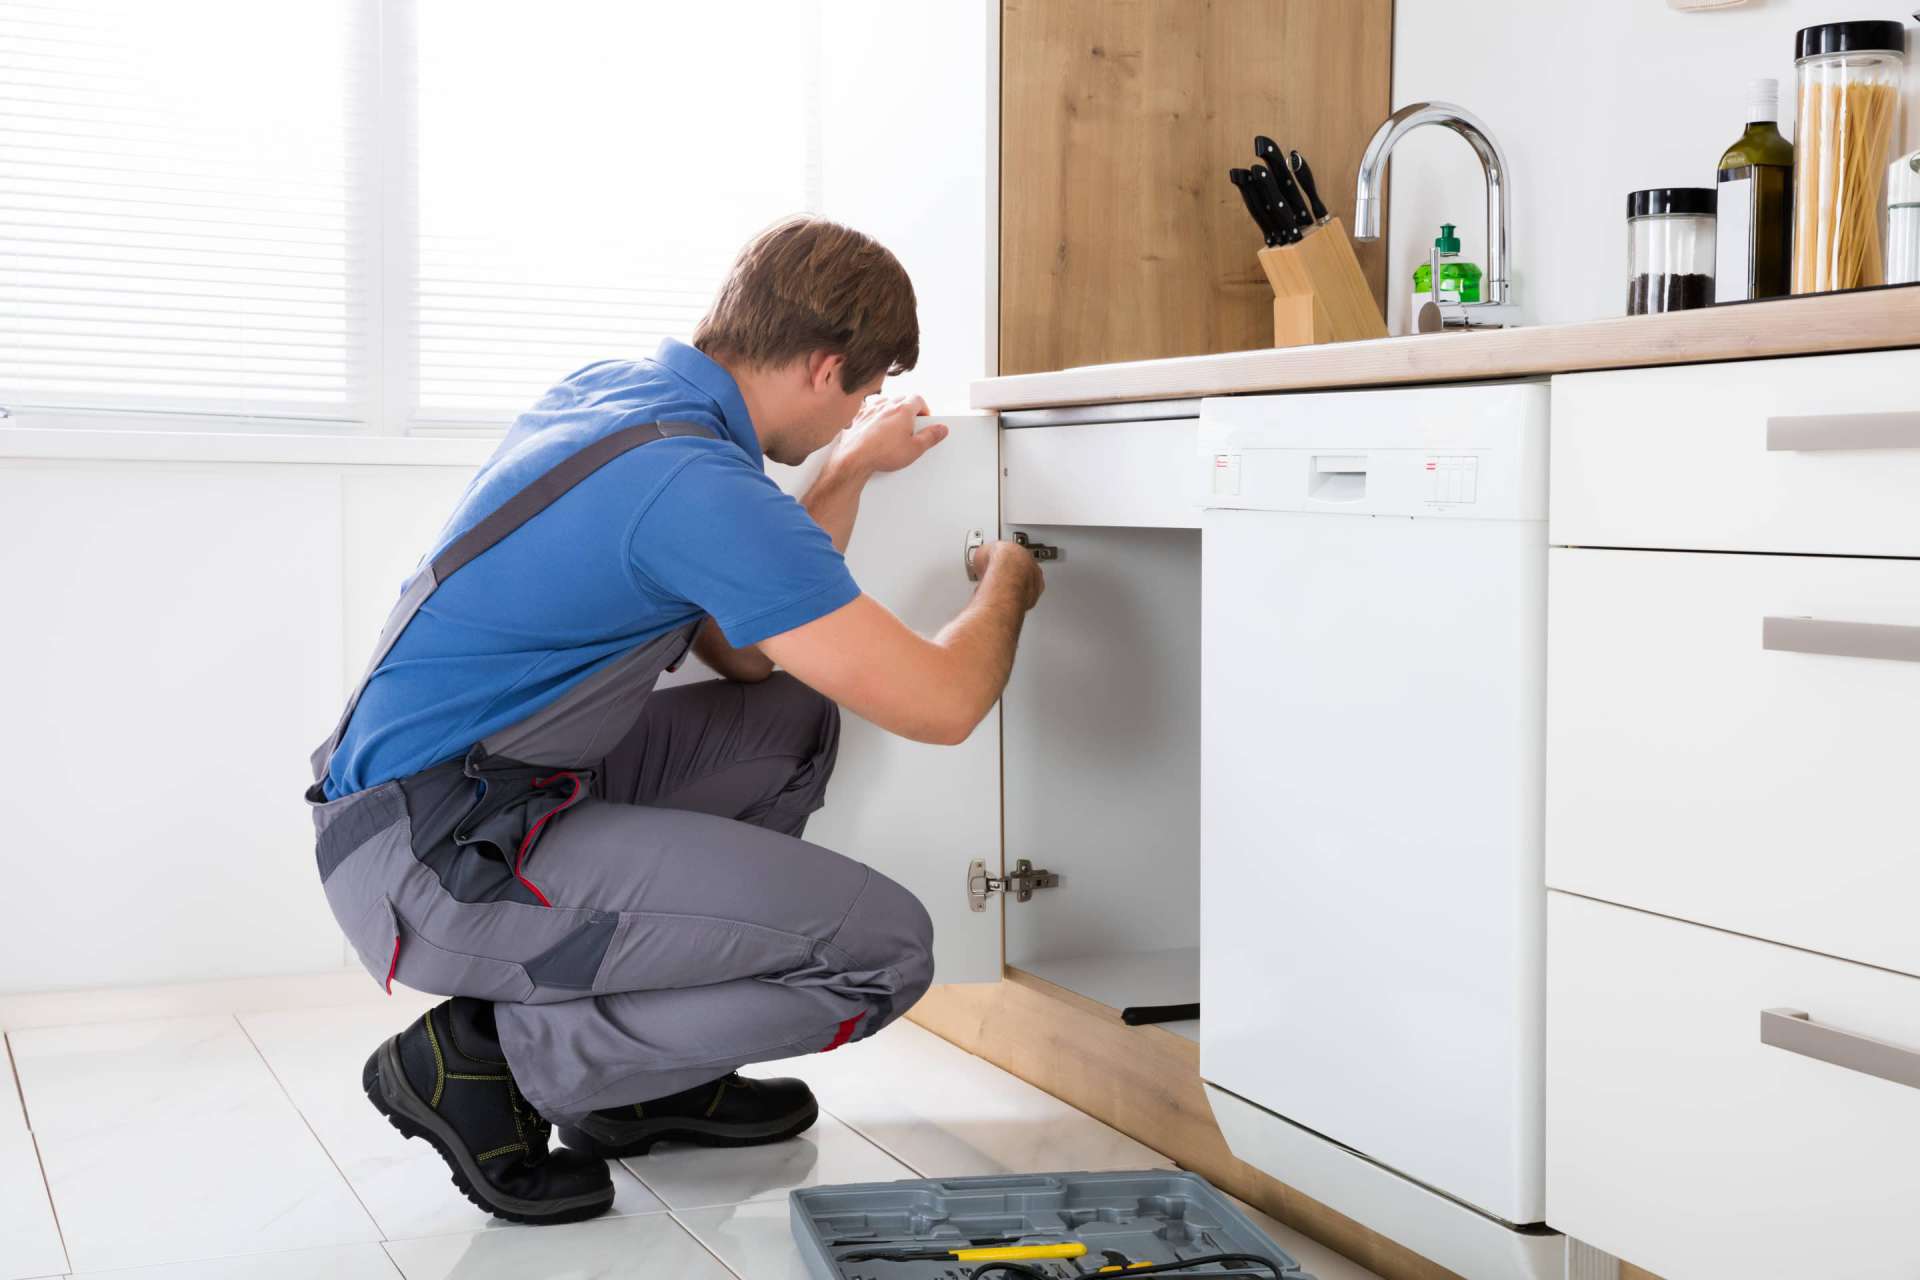 What Questions To Ask at an Apartment Showing | Man Servicing Sink Leak | www.phillyaptrentals.com